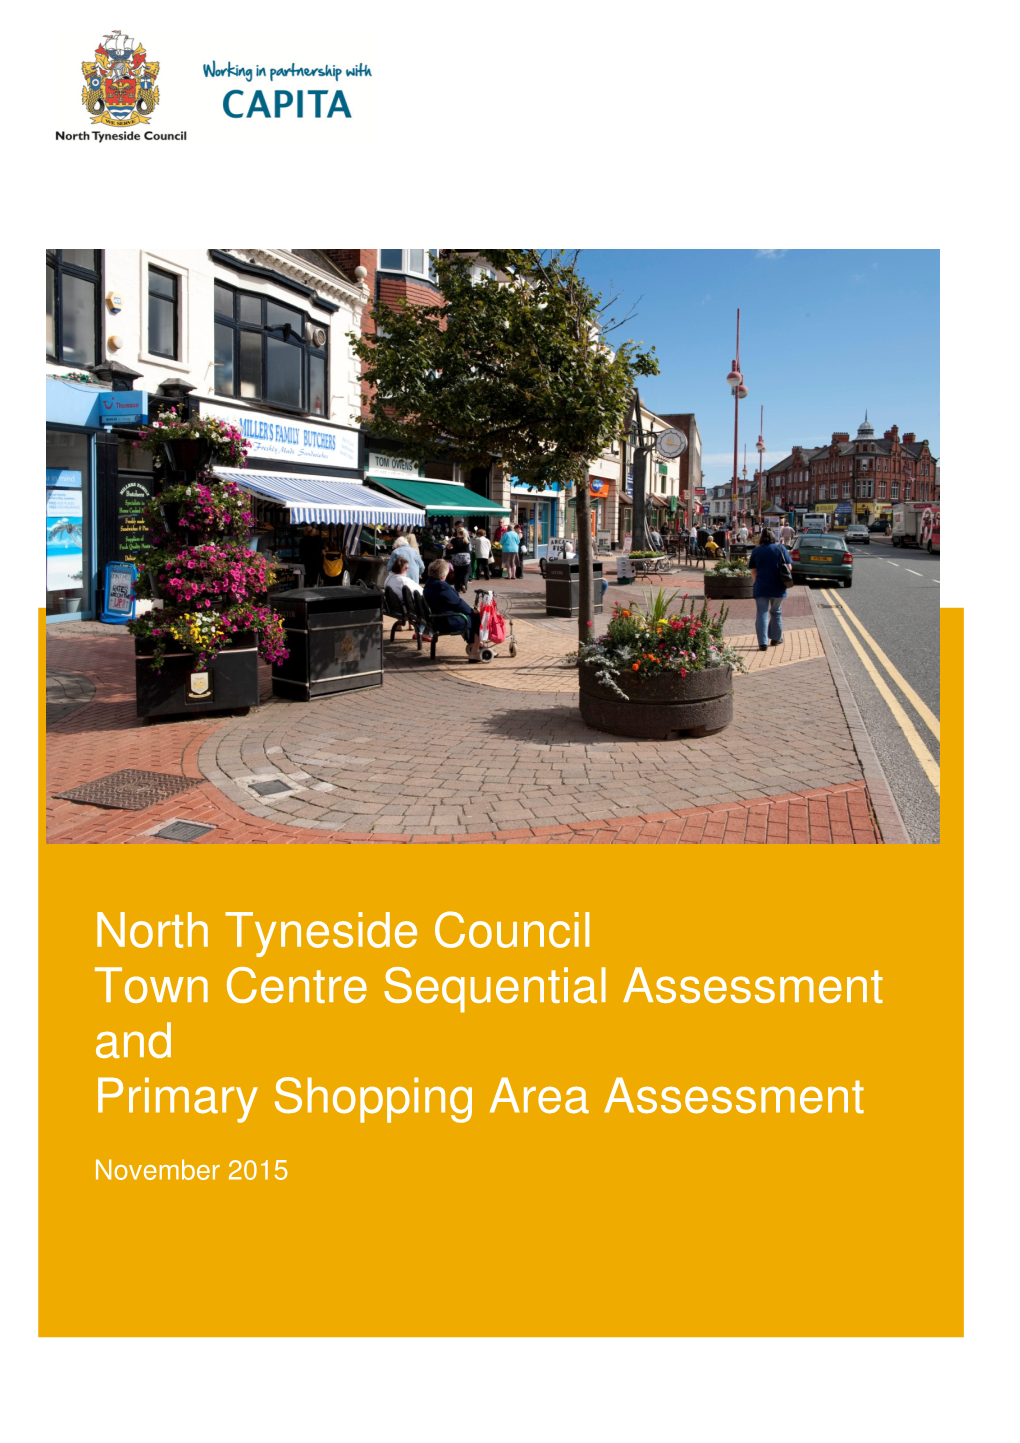 North Tyneside Council Town Centre Sequential Assessment and Primary Shopping Area Assessment